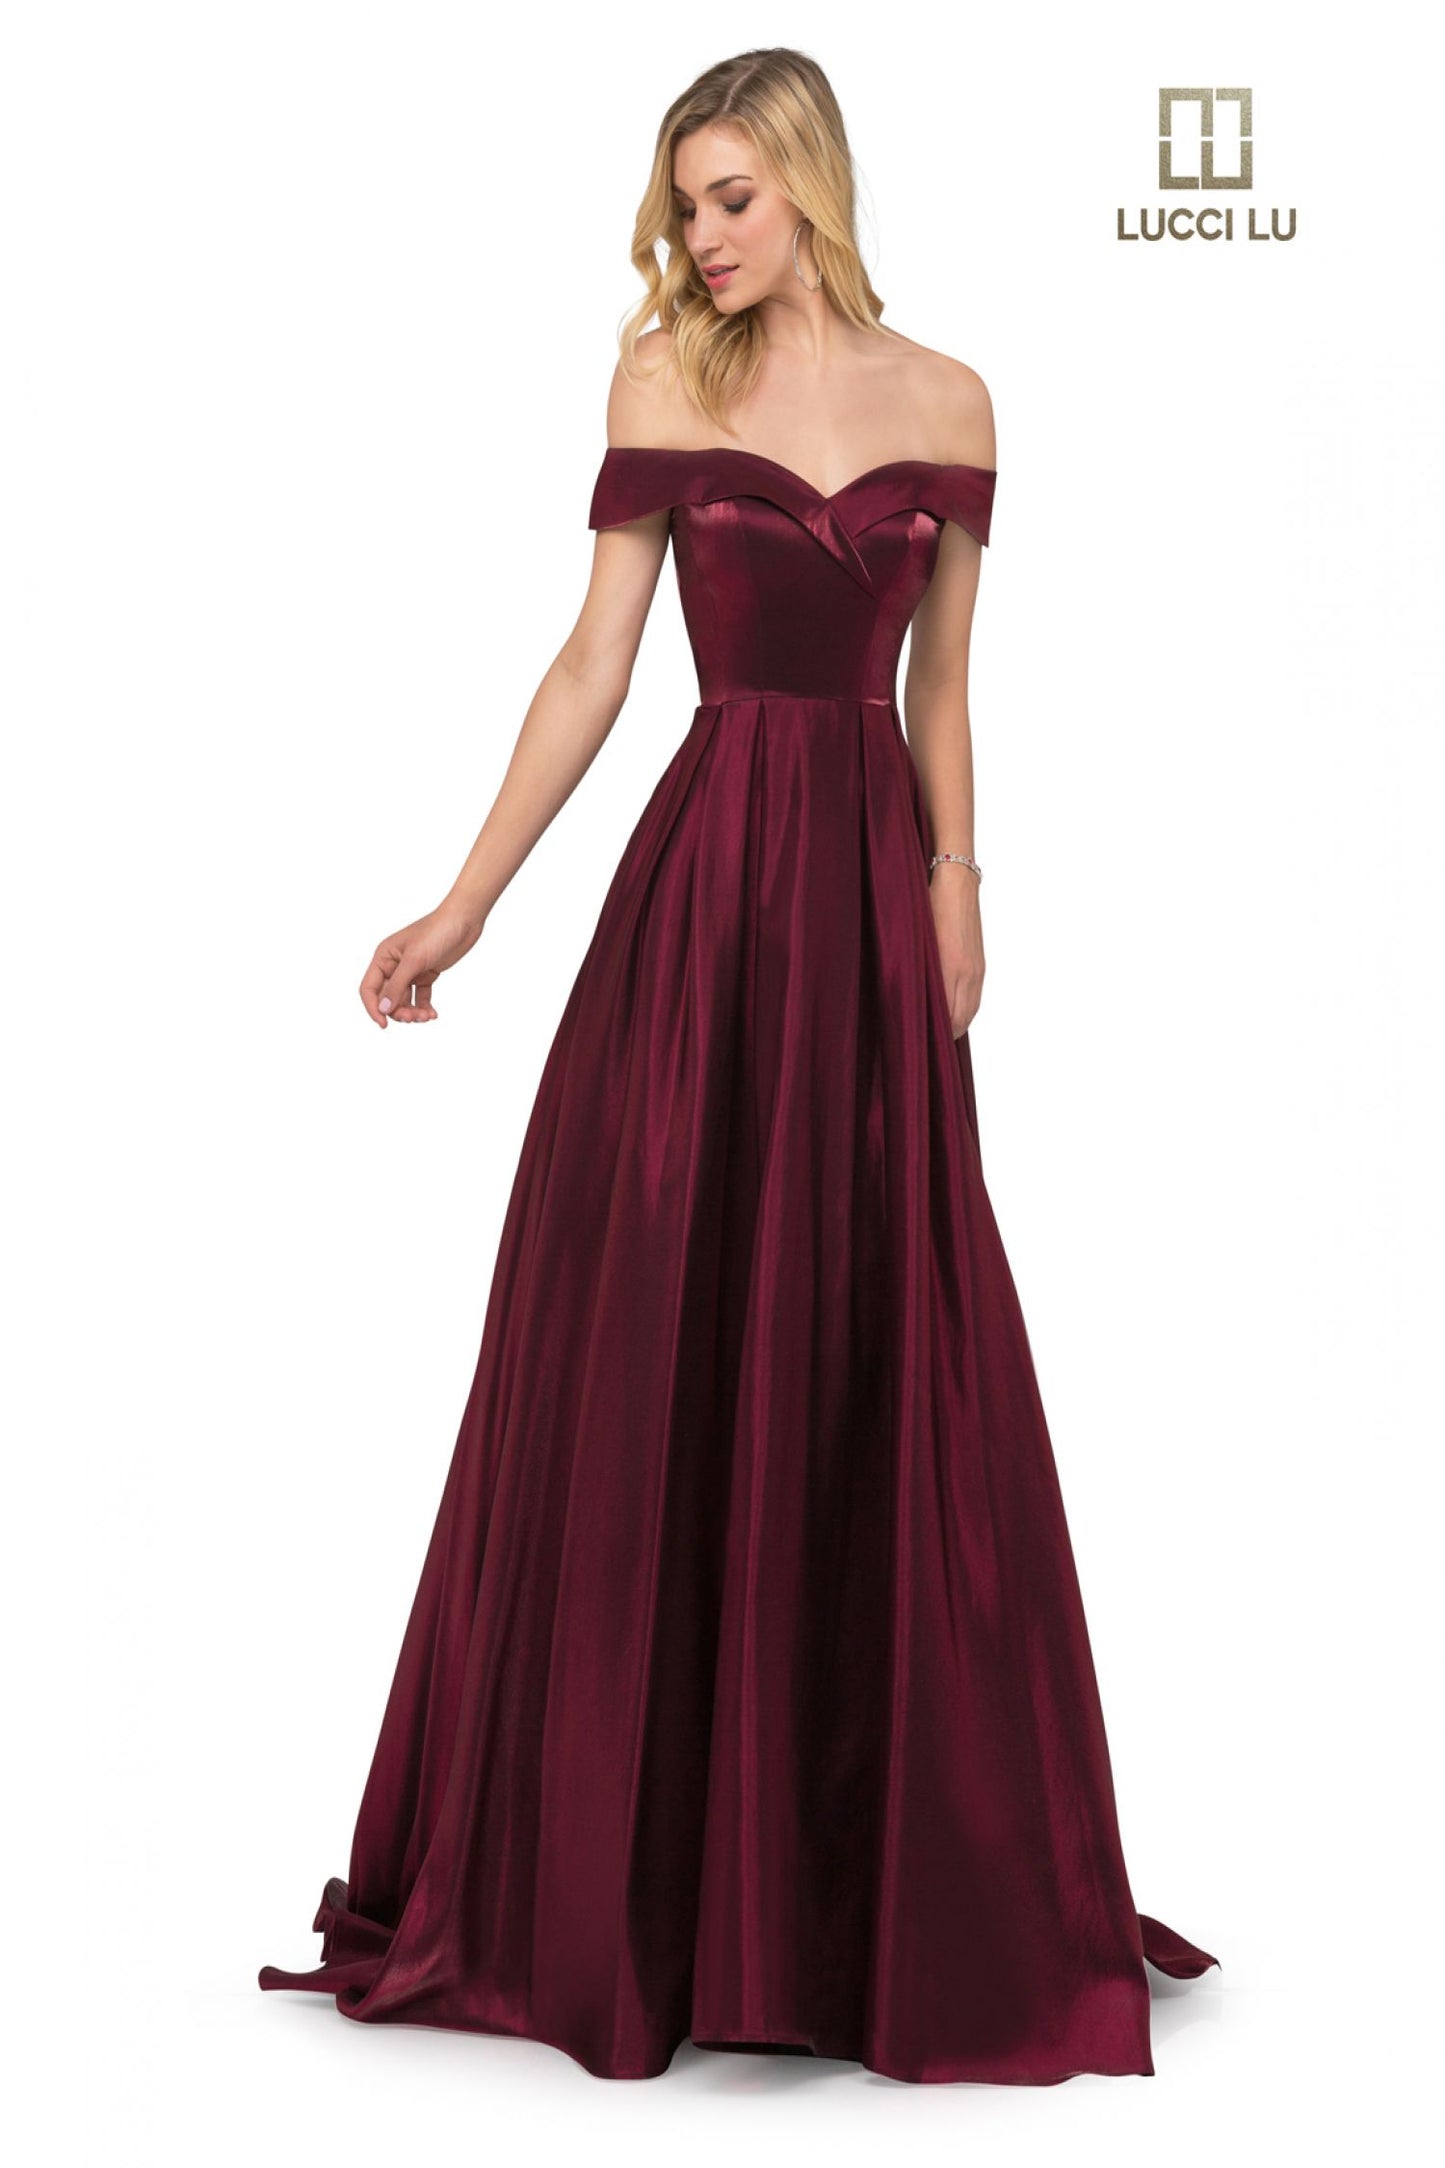 Lucci Lu 28063 Size 14 Claret Formal A Line off the shoulder evening gown Prom Dress Satin off the shoulder Pockets  Available Color: Claret  Available Size: 14